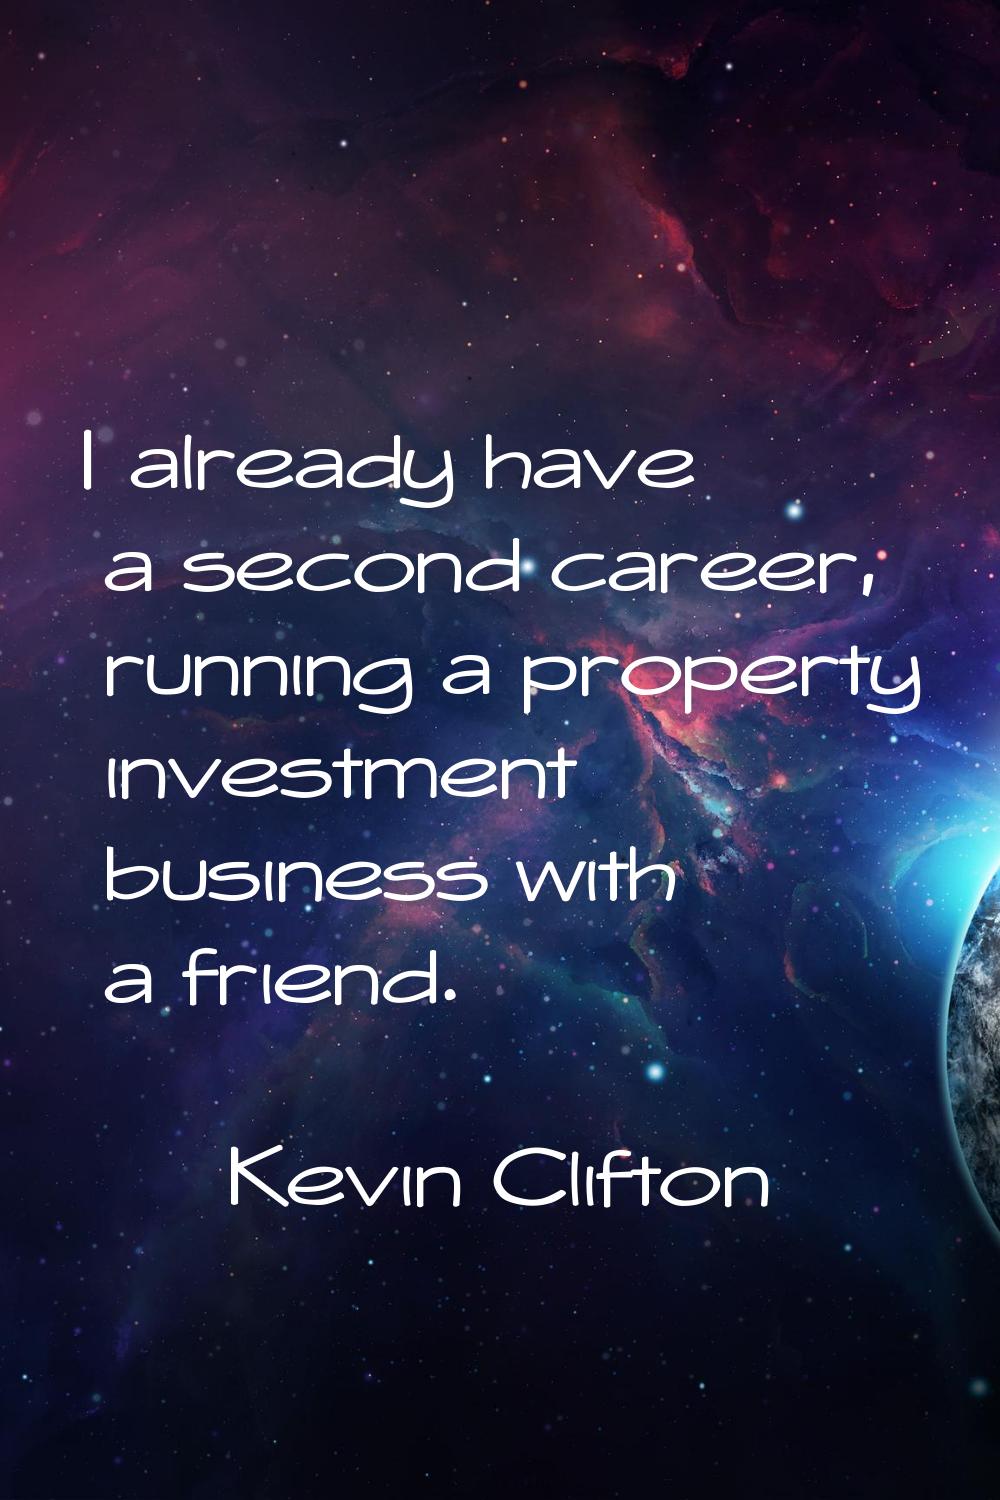 I already have a second career, running a property investment business with a friend.